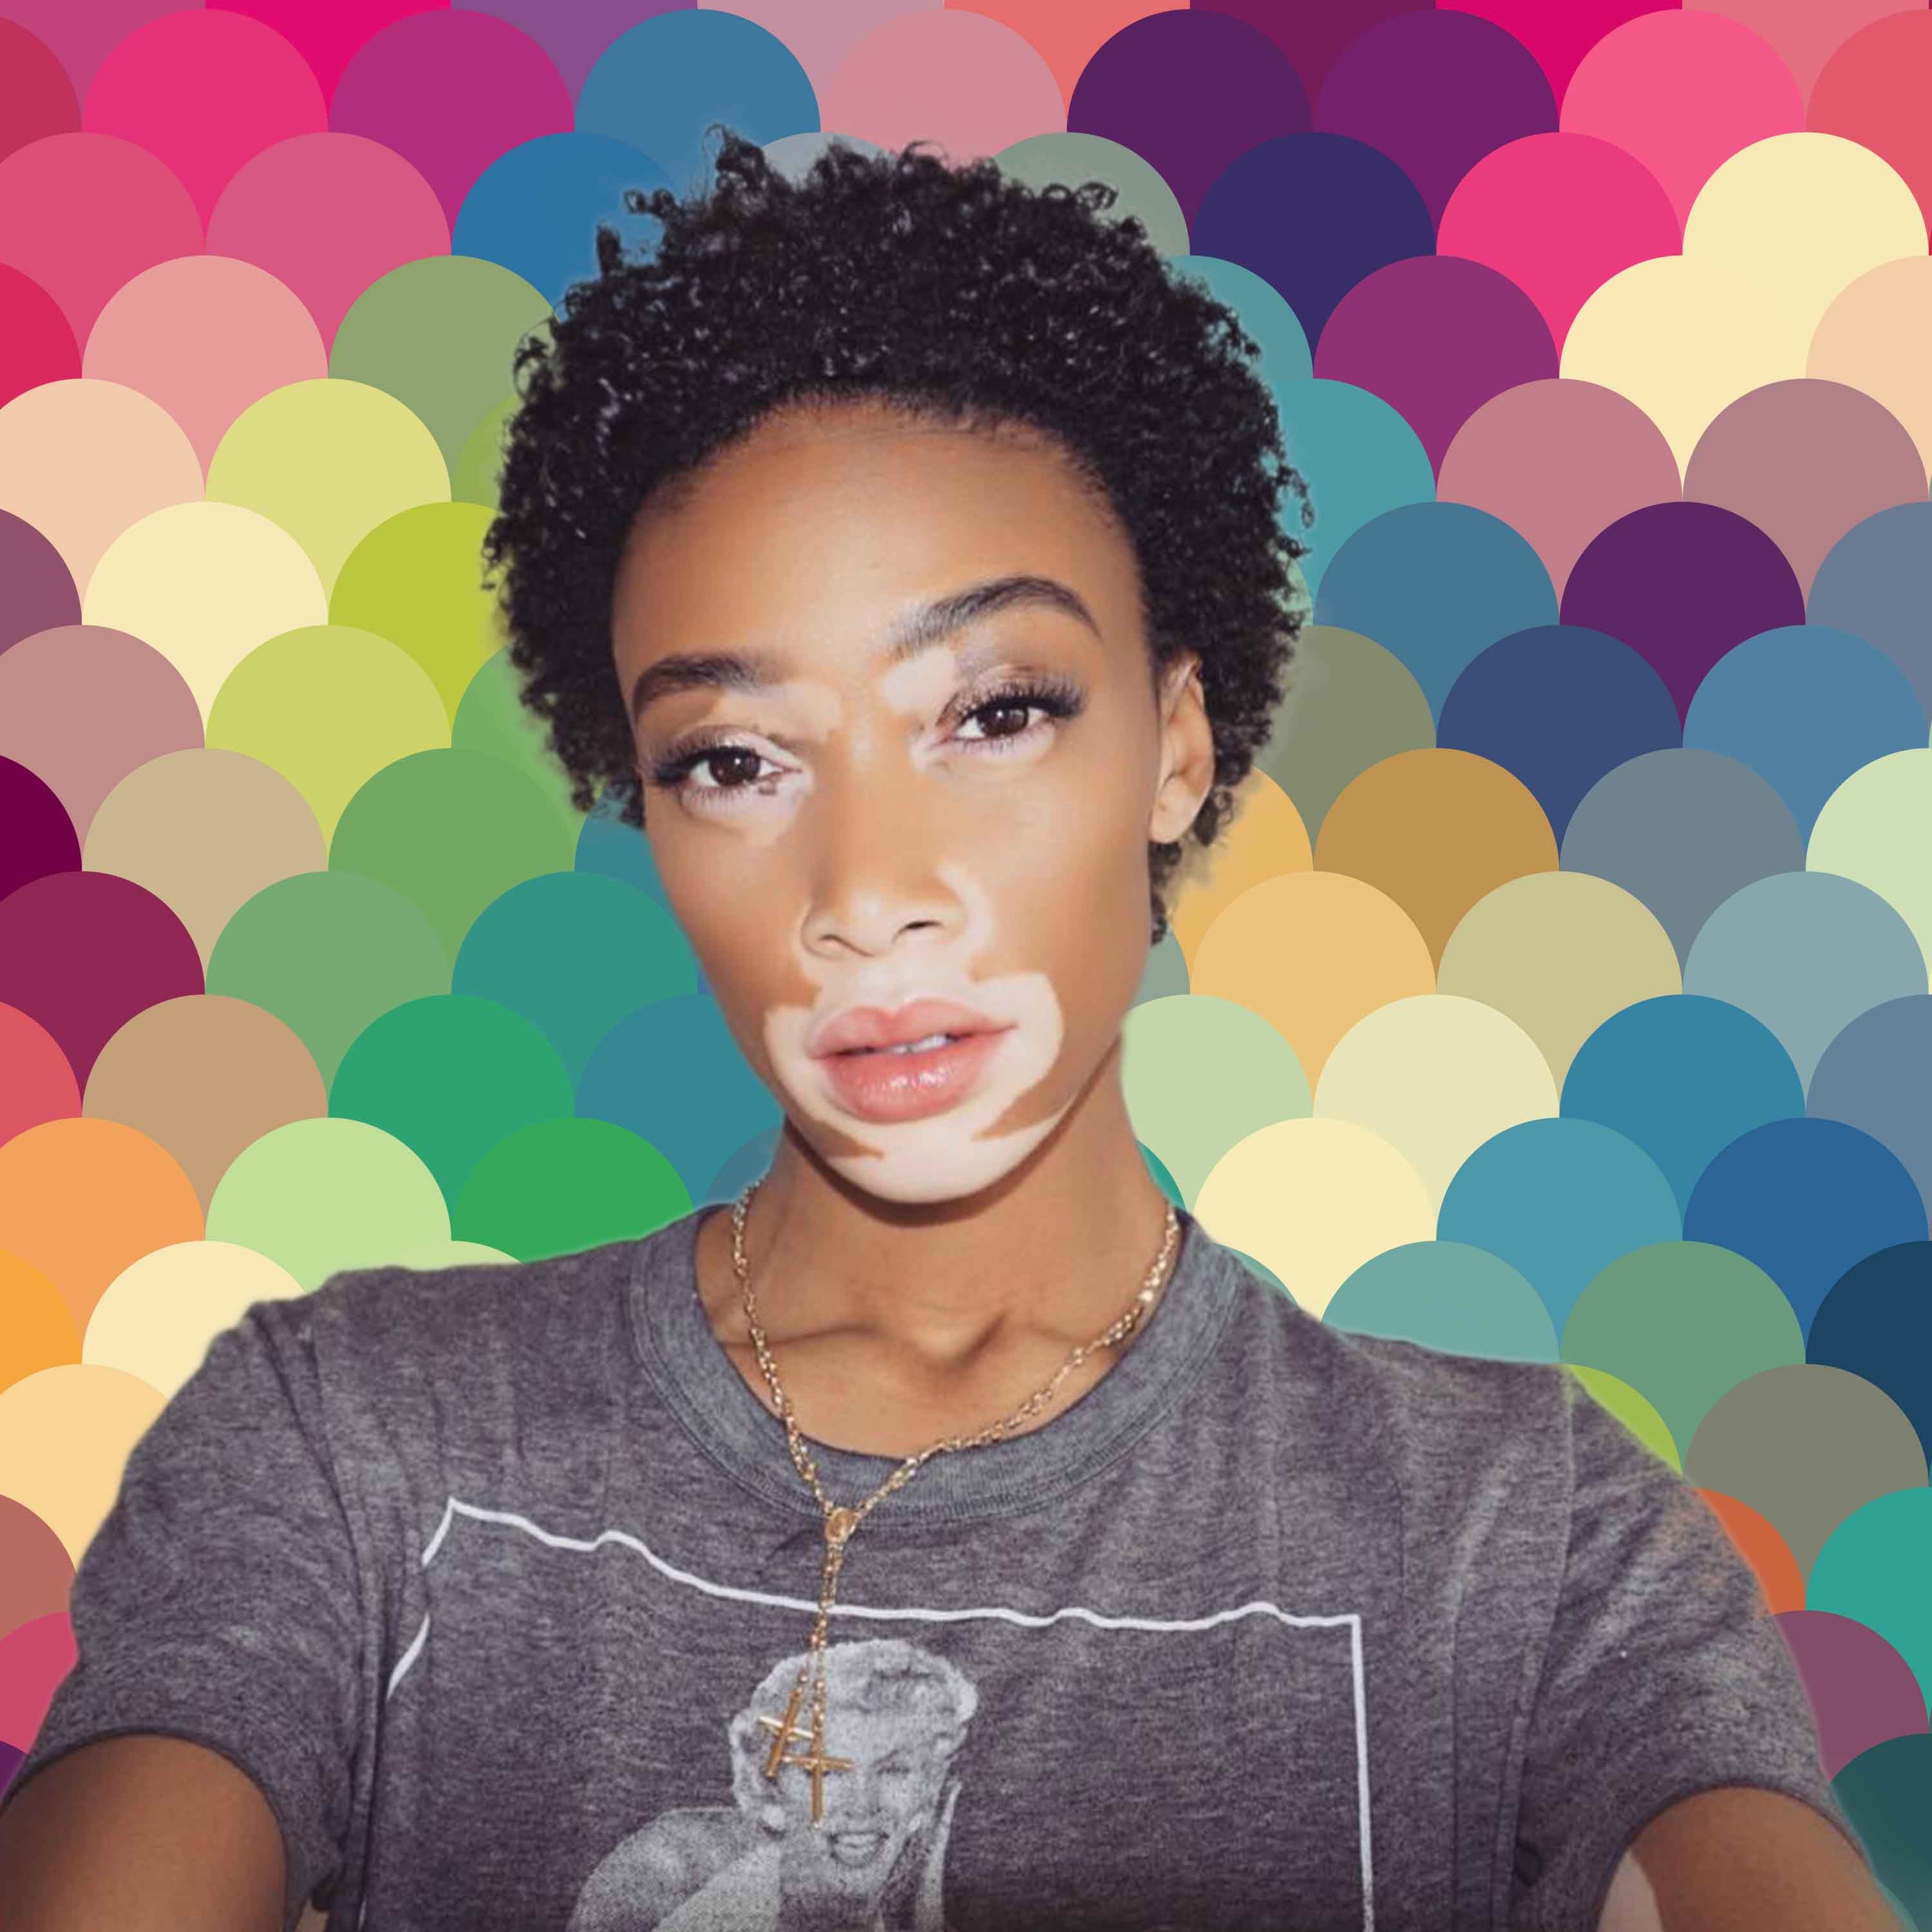 Winnie Harlow Shares a Instagram Video That's Both Surprising and Inspiring
